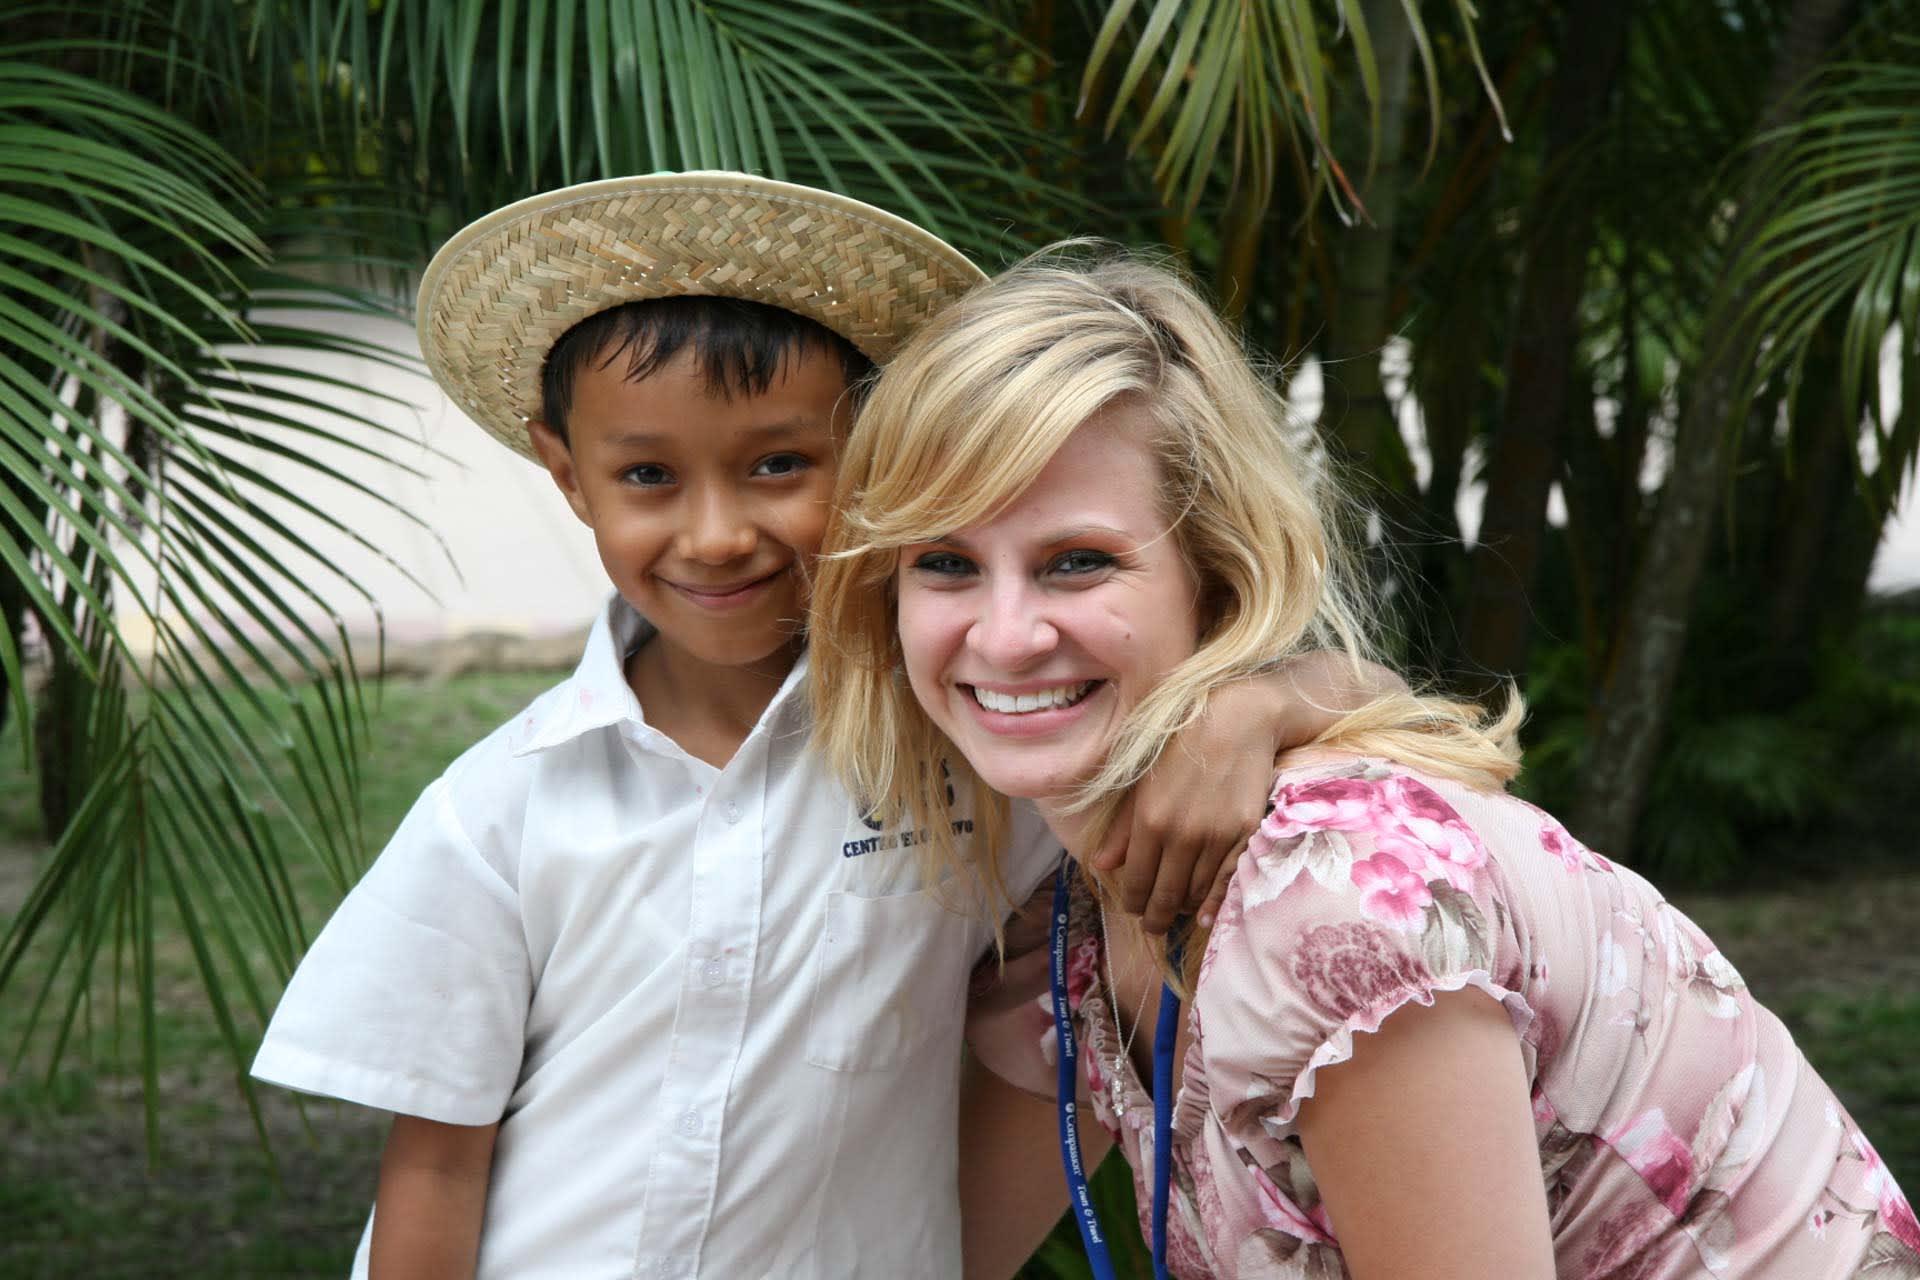 A boy and his sponsor are smiling together. They are standing together outside in front of the trees. The woman has blonde hair and the little boy is wearing a straw hat.